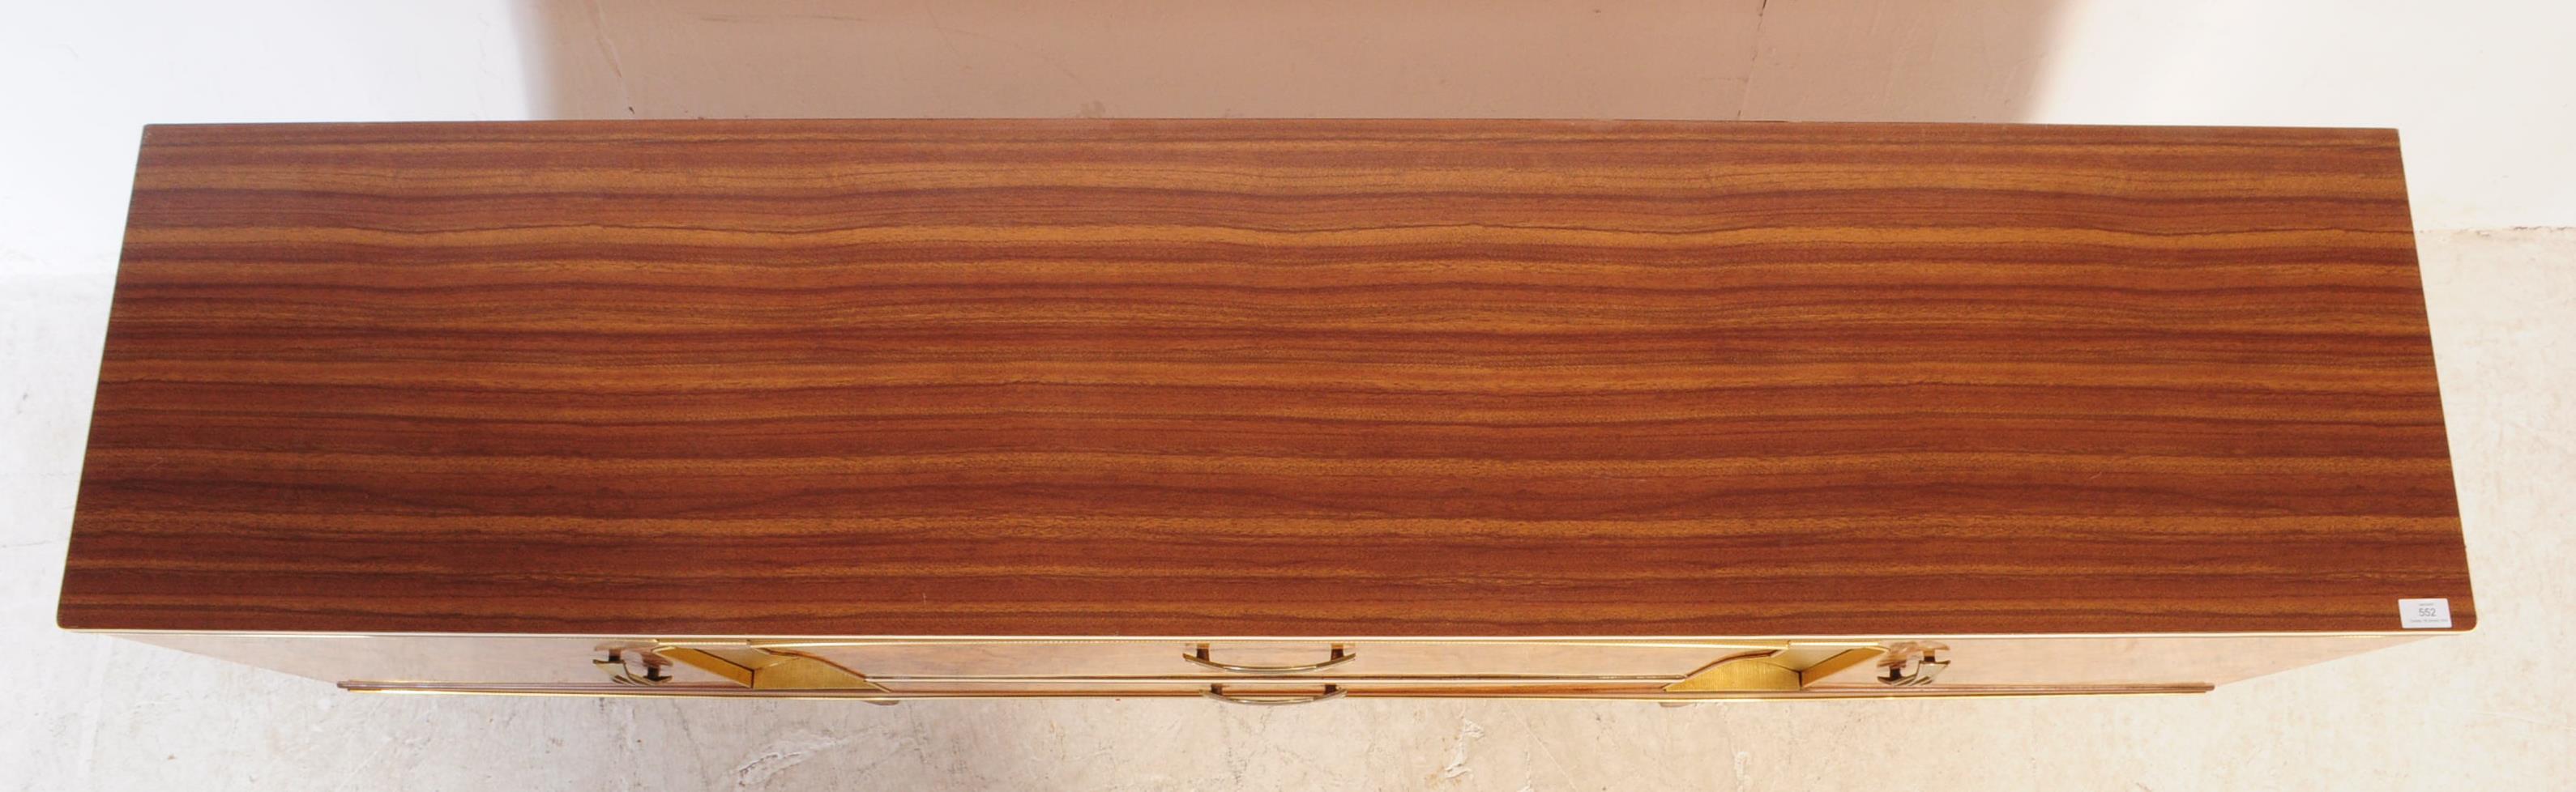 MID 20TH CENTURY BEAUTILITY WALNUT FORMICA SIDEBOARD - Image 3 of 8